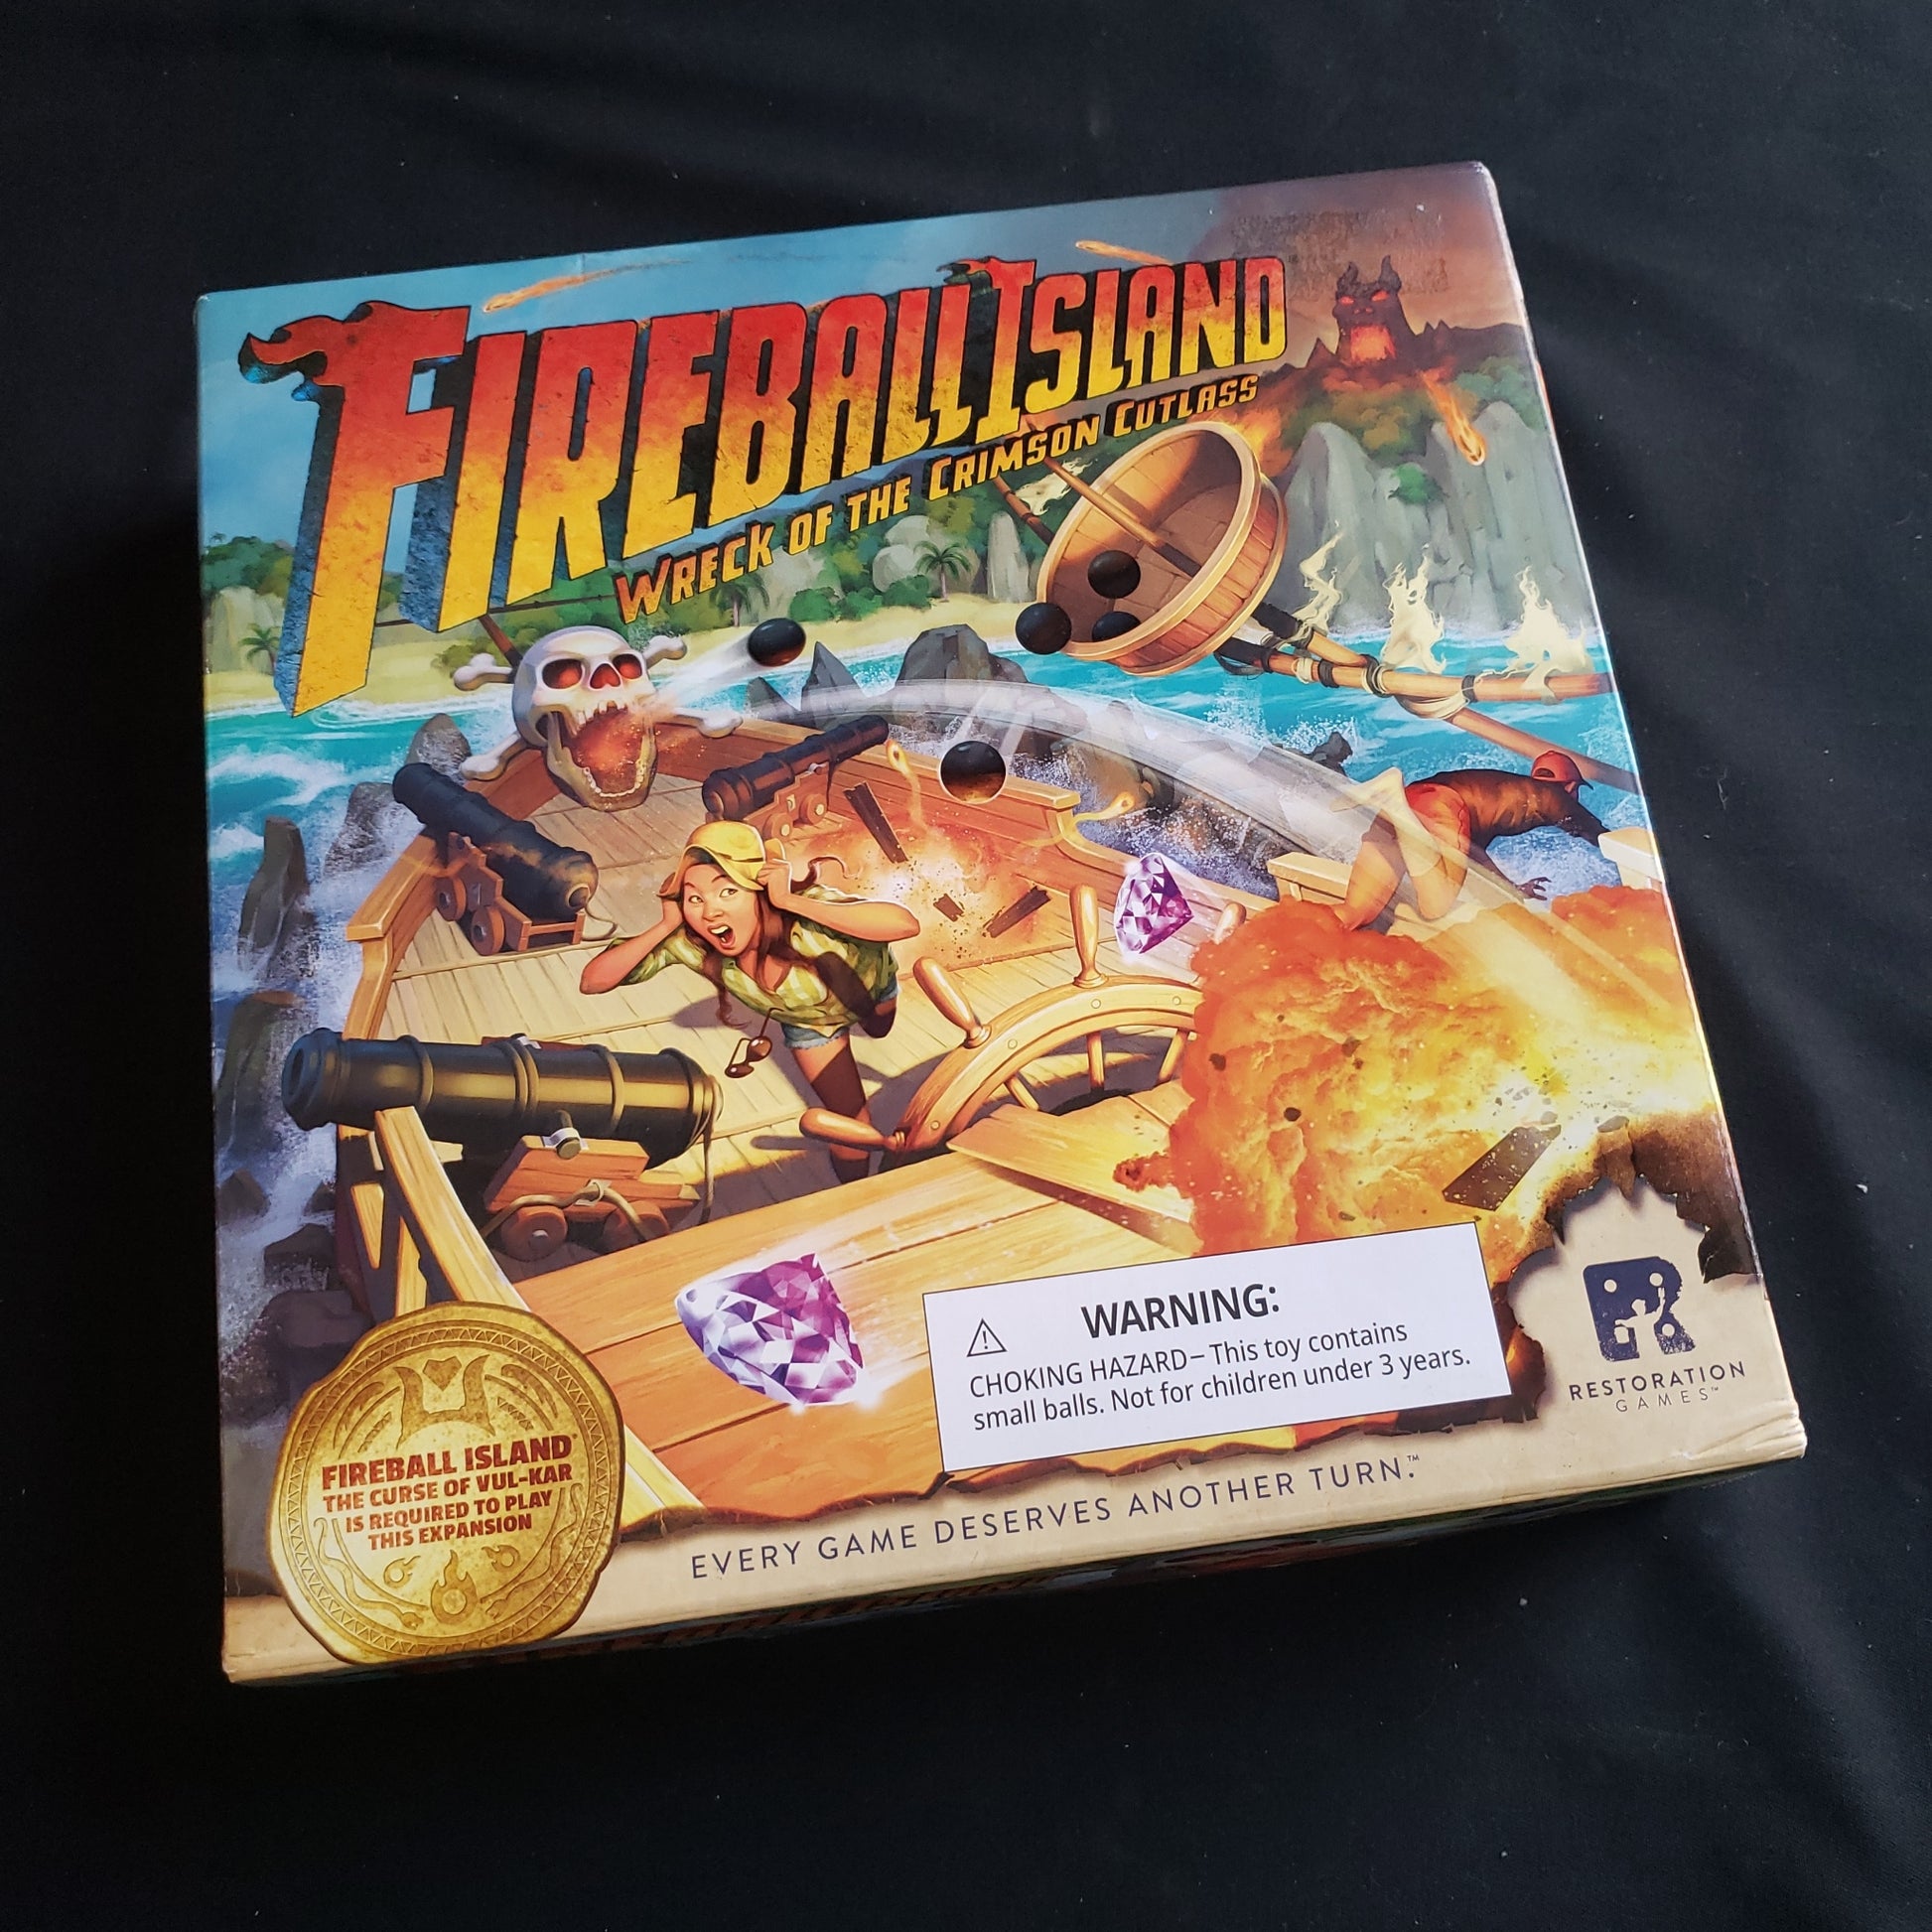 Image shows the front cover of the box of the Wreck of the Crimson Cutlass expansion for the Fireball Island board game